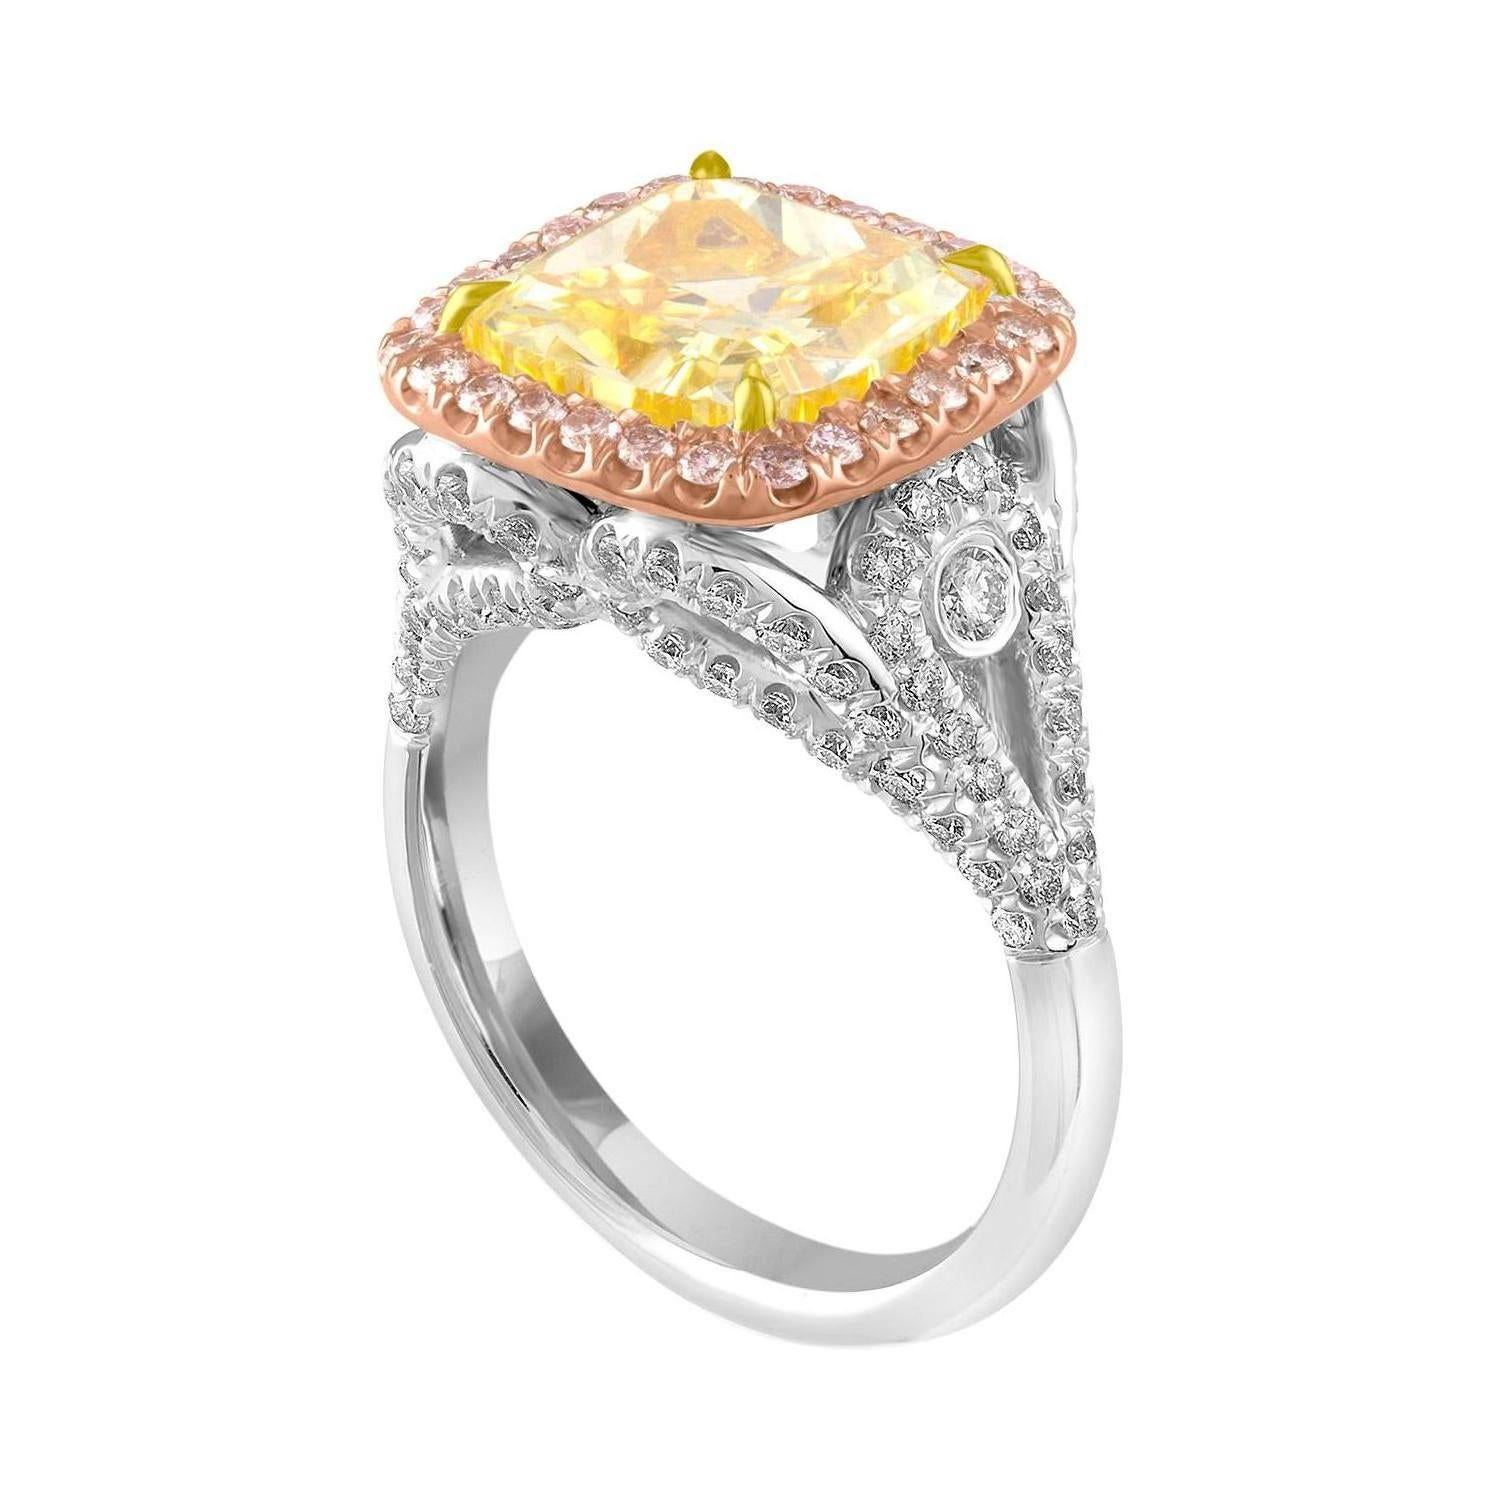 Beautiful Hand Crafted Three Colors Metal combined with Yellow, Pink & White Diamonds Ring. Yellow Diamond set in 18K Yellow Gold, Pink Diamonds are set in 18K Rose Gold and White Diamonds are set in Platinum.
The 5.03 Carat Cushion is a GIA